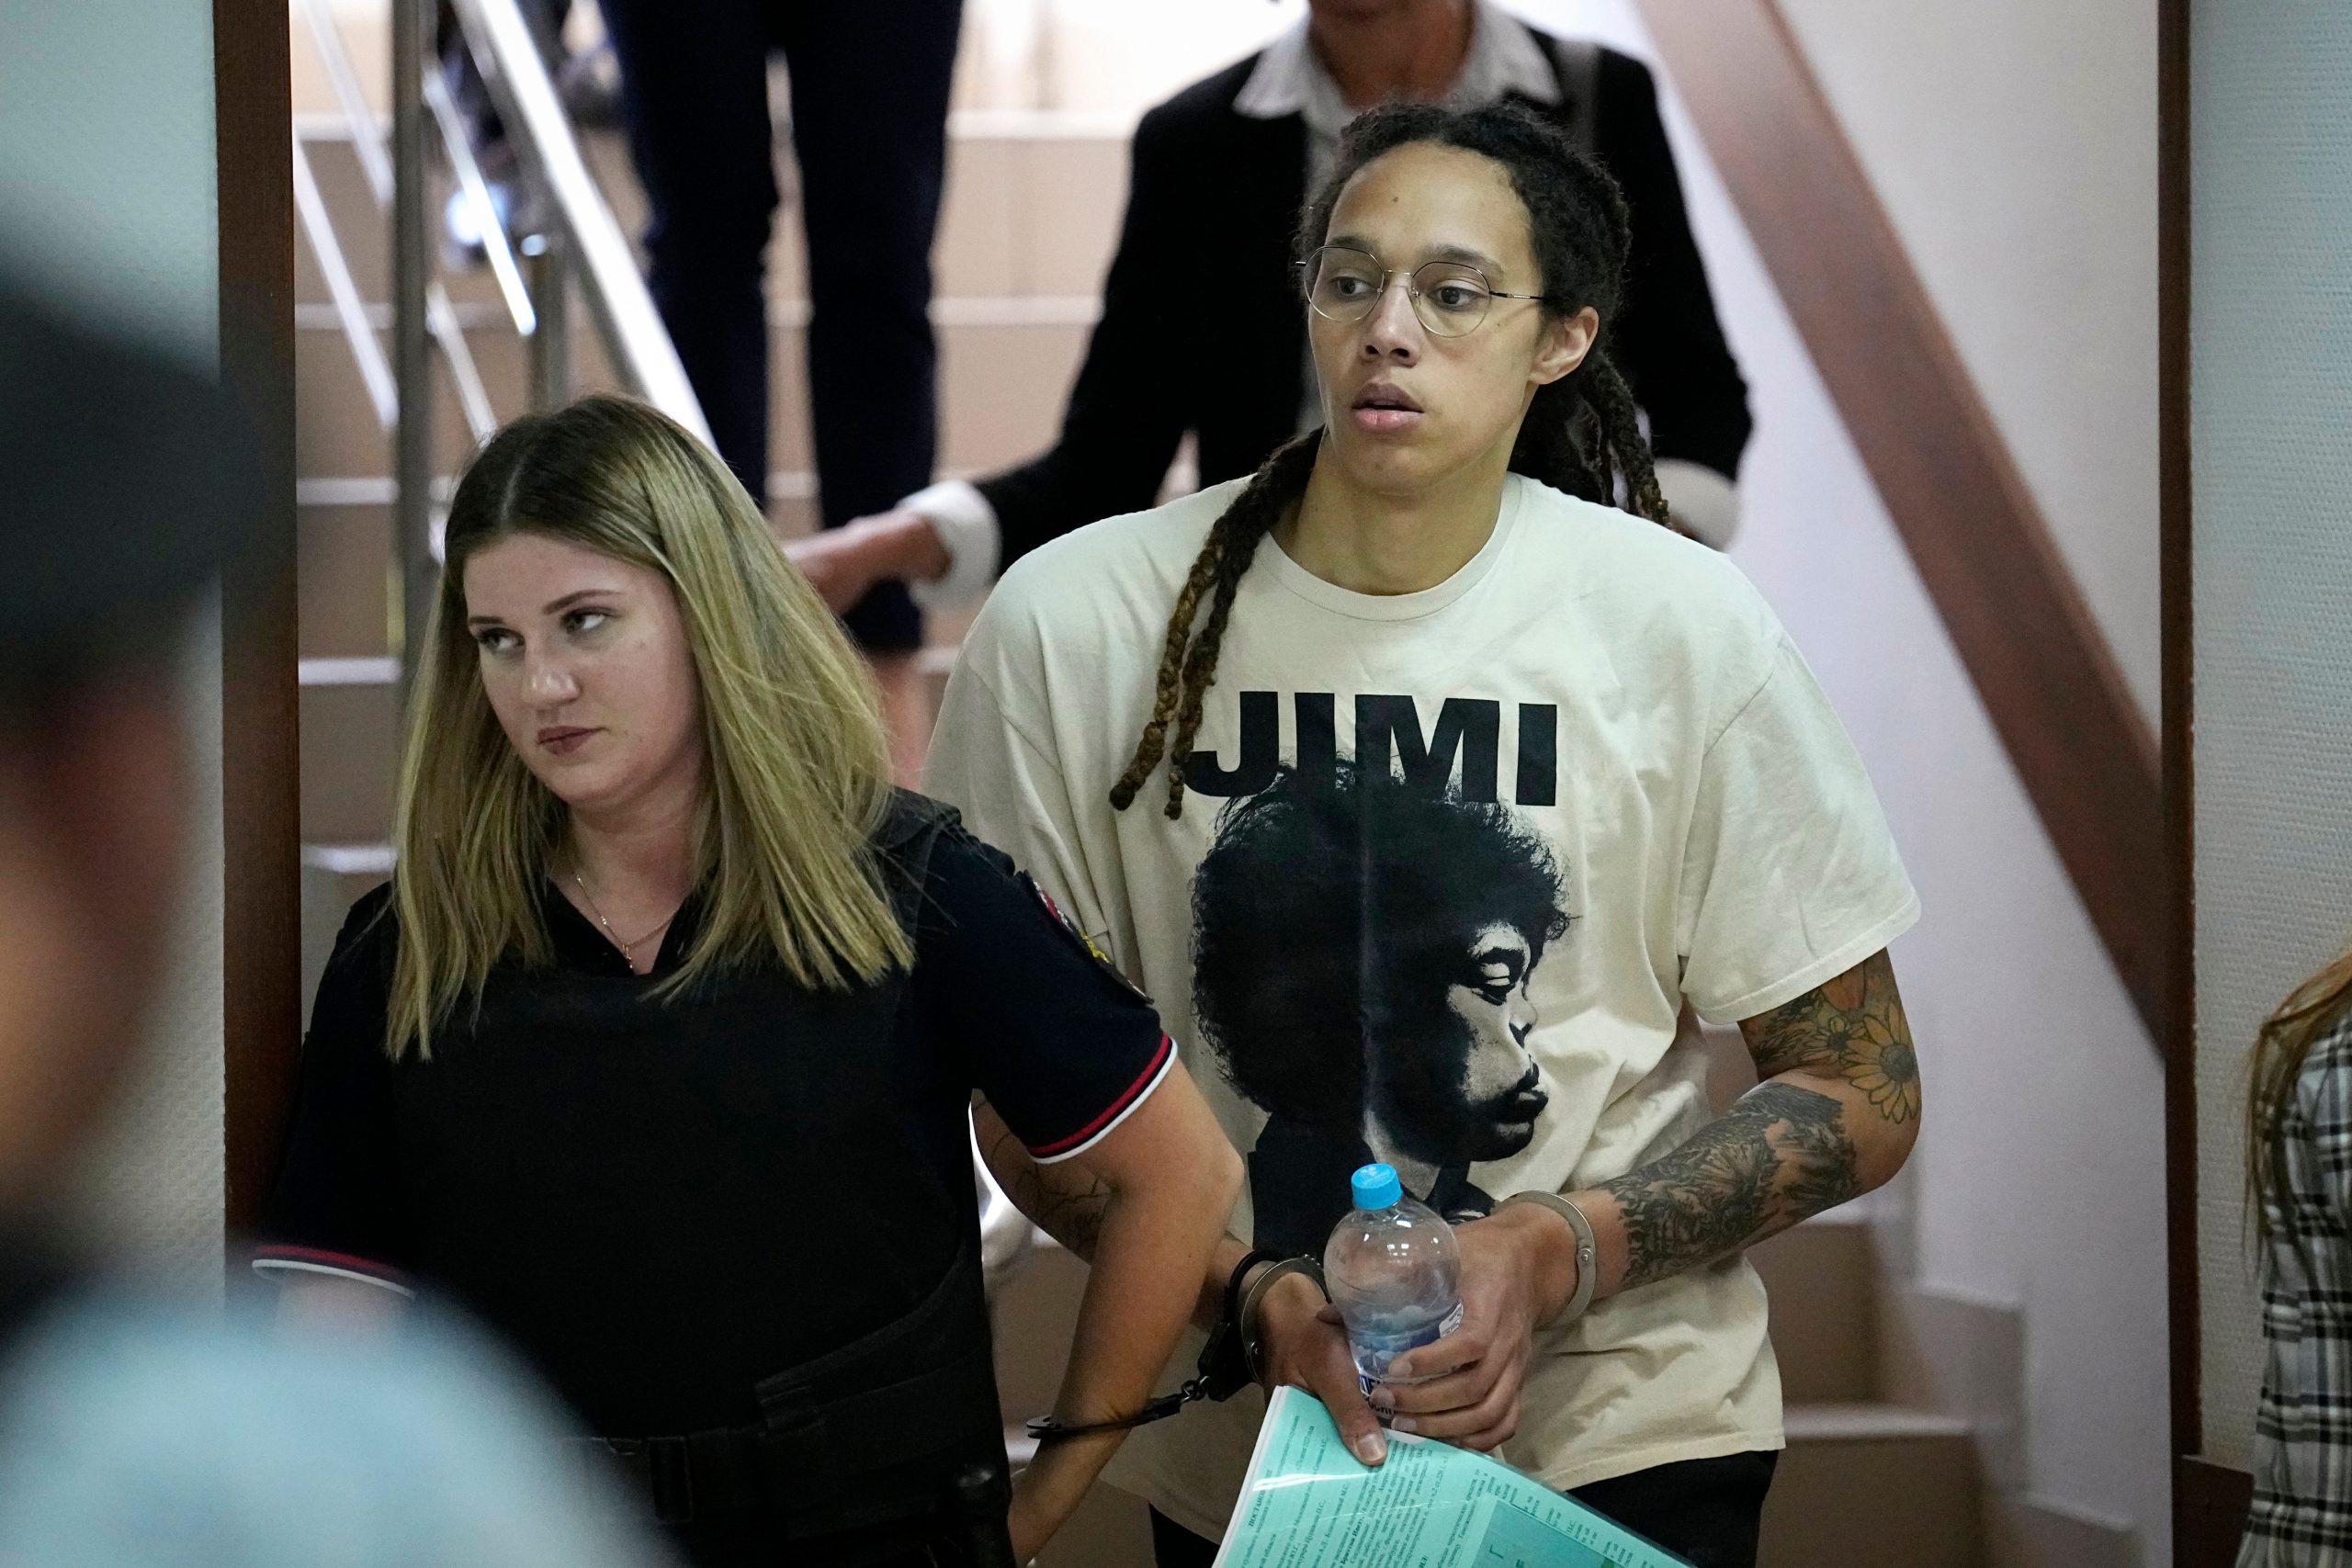 Basketball star Brittney Griner appears in court, pleads guilty in Russia drugs trial